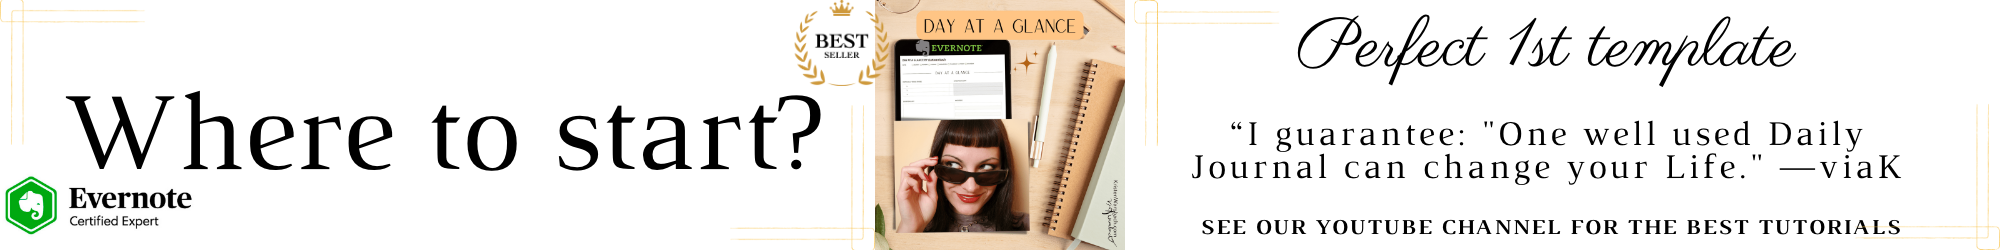 Evernote Daily Planner a Day at a Glance